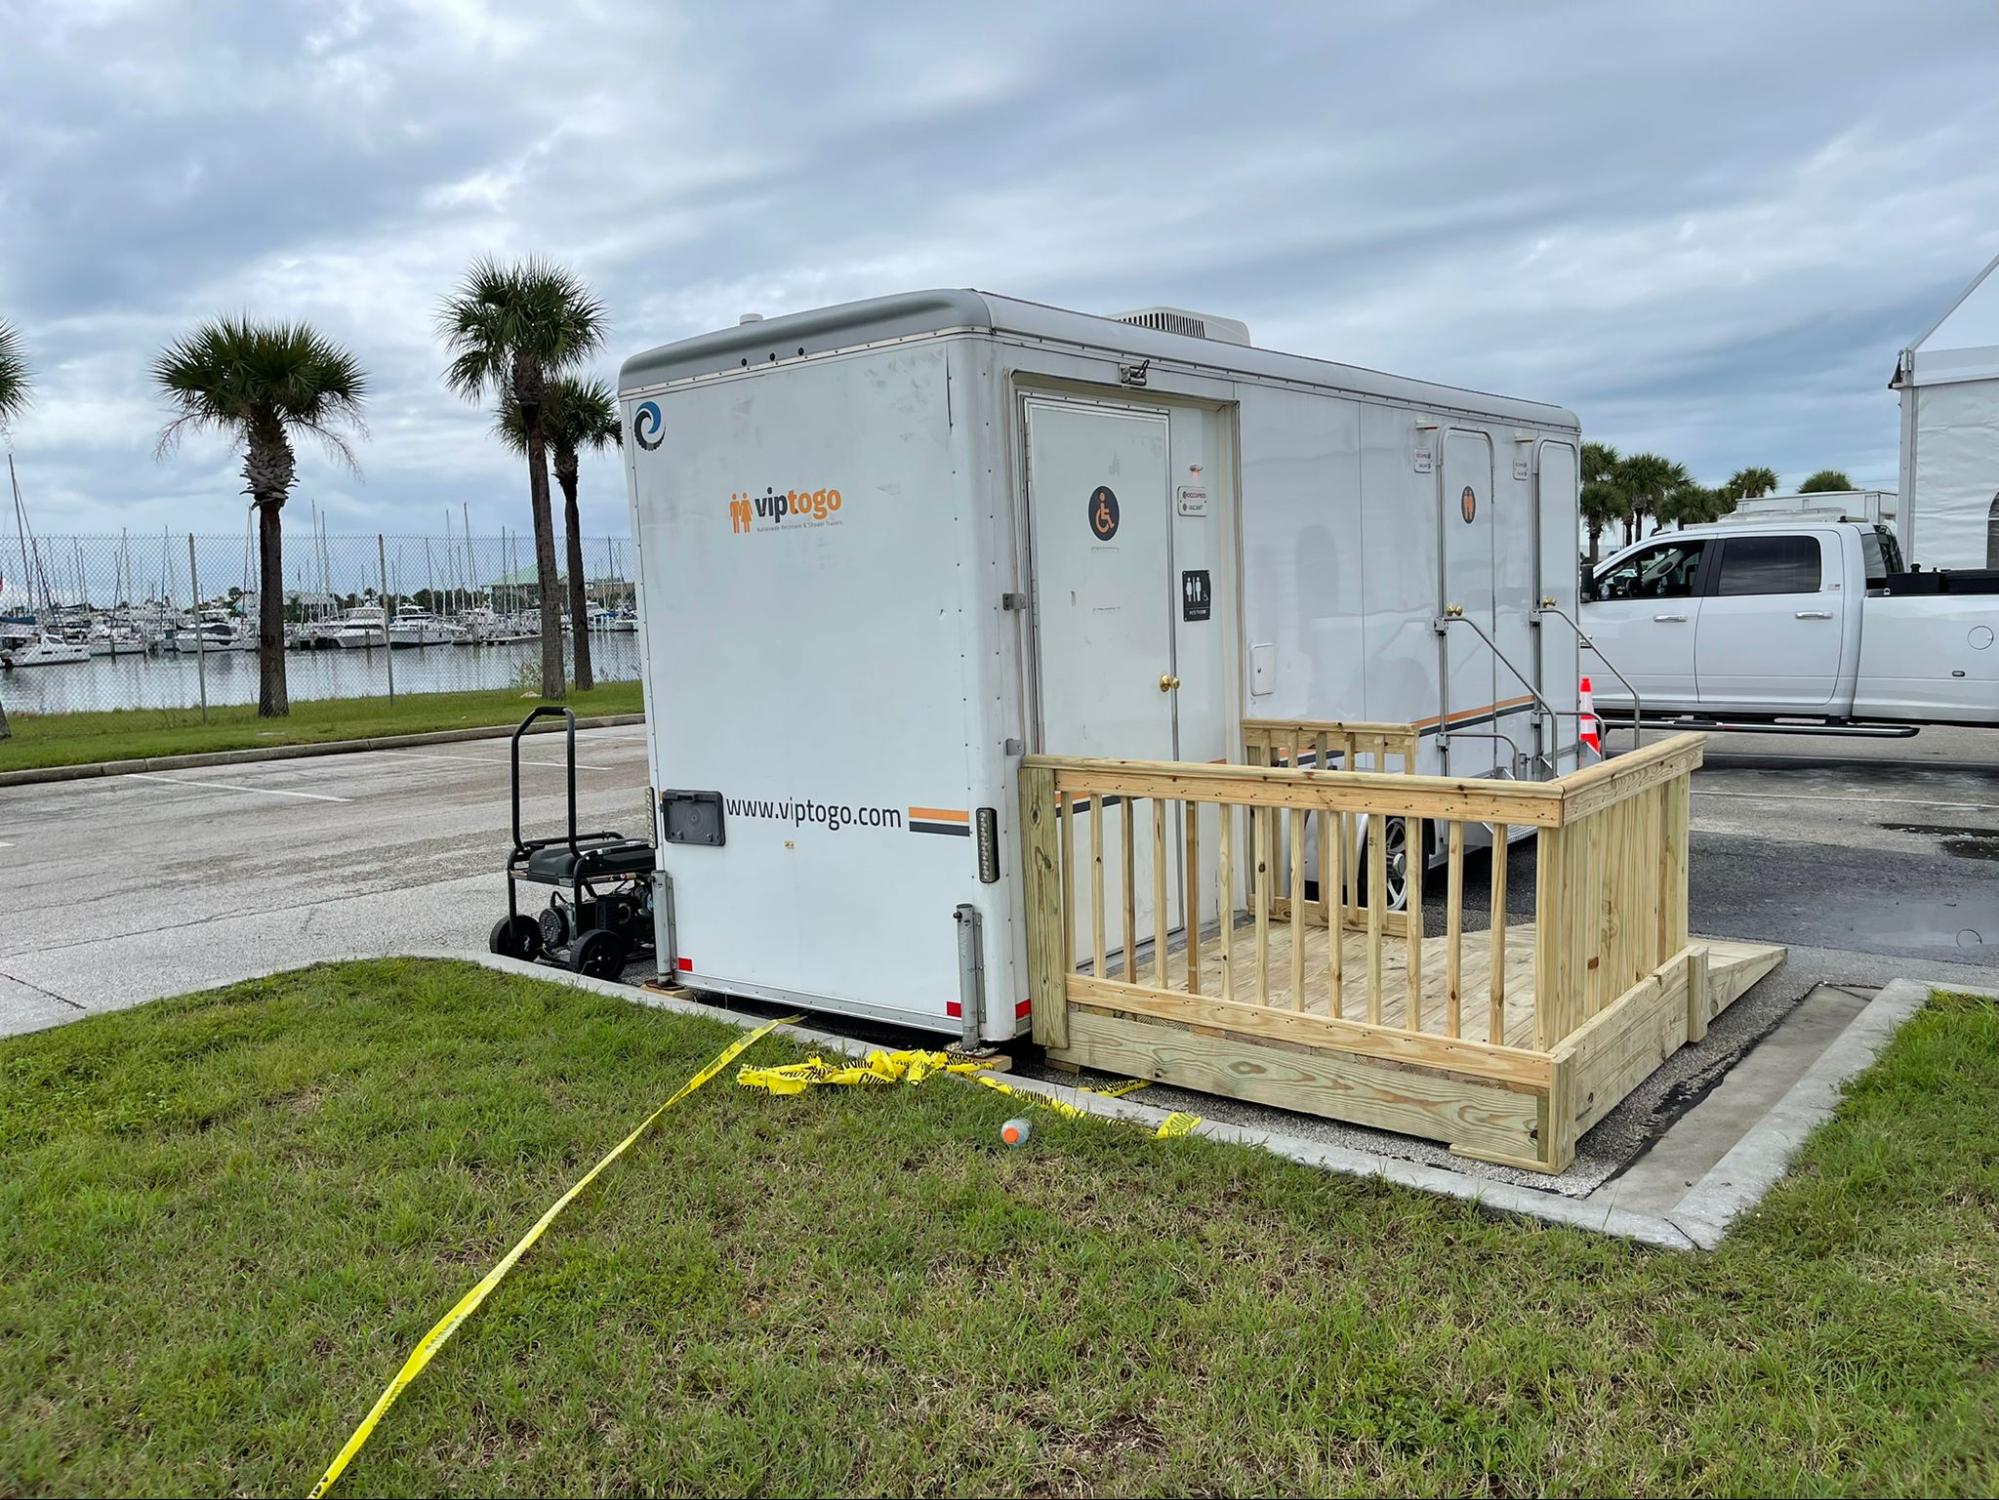 ADA-compliant luxury restroom trailer at Fort Lauderdale event